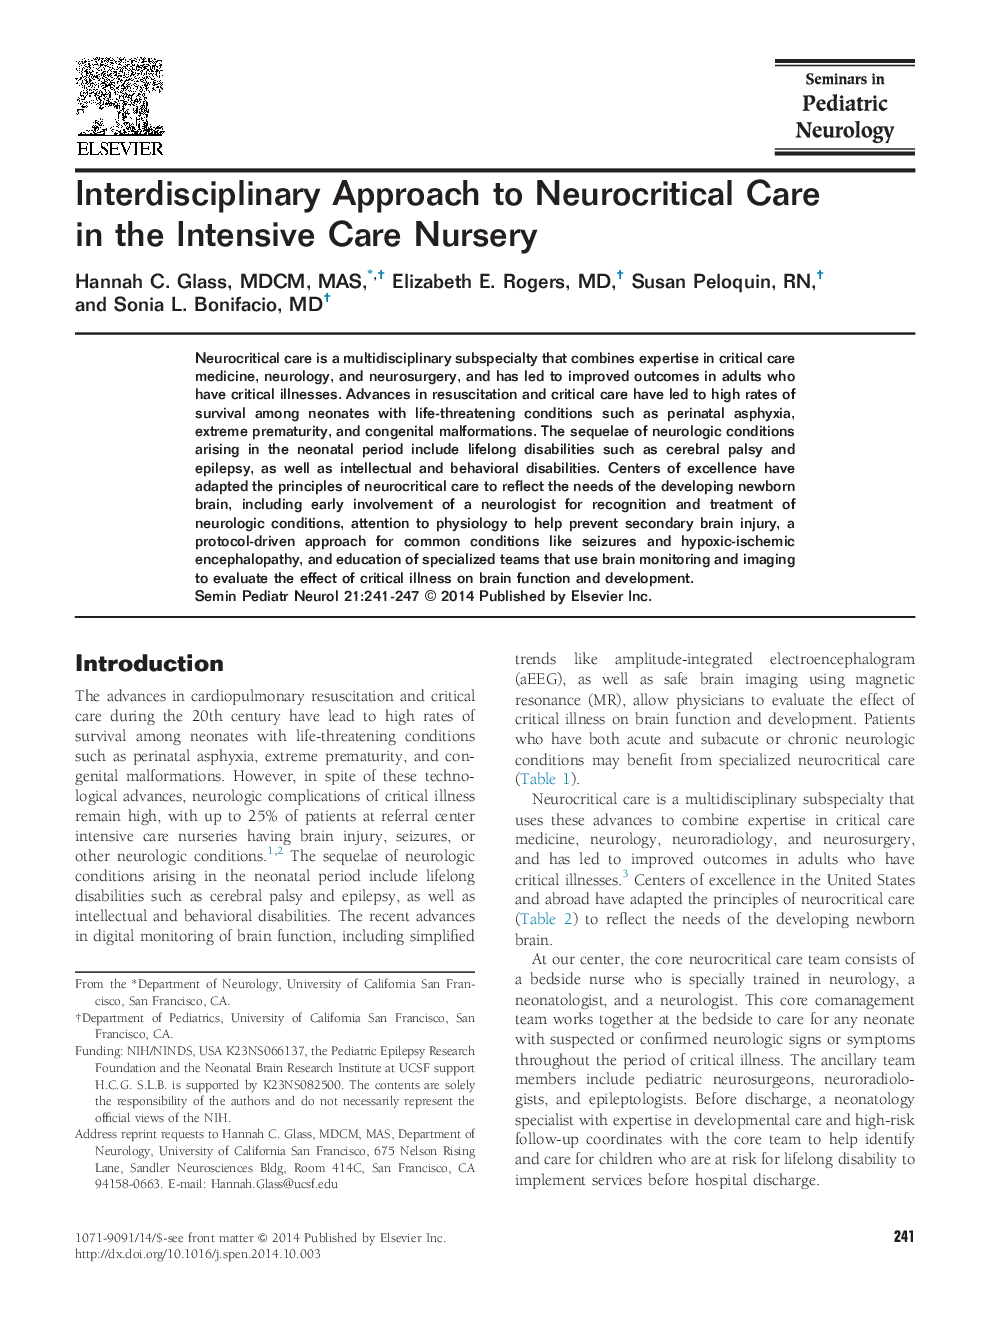 Interdisciplinary Approach to Neurocritical Care in the Intensive Care Nursery